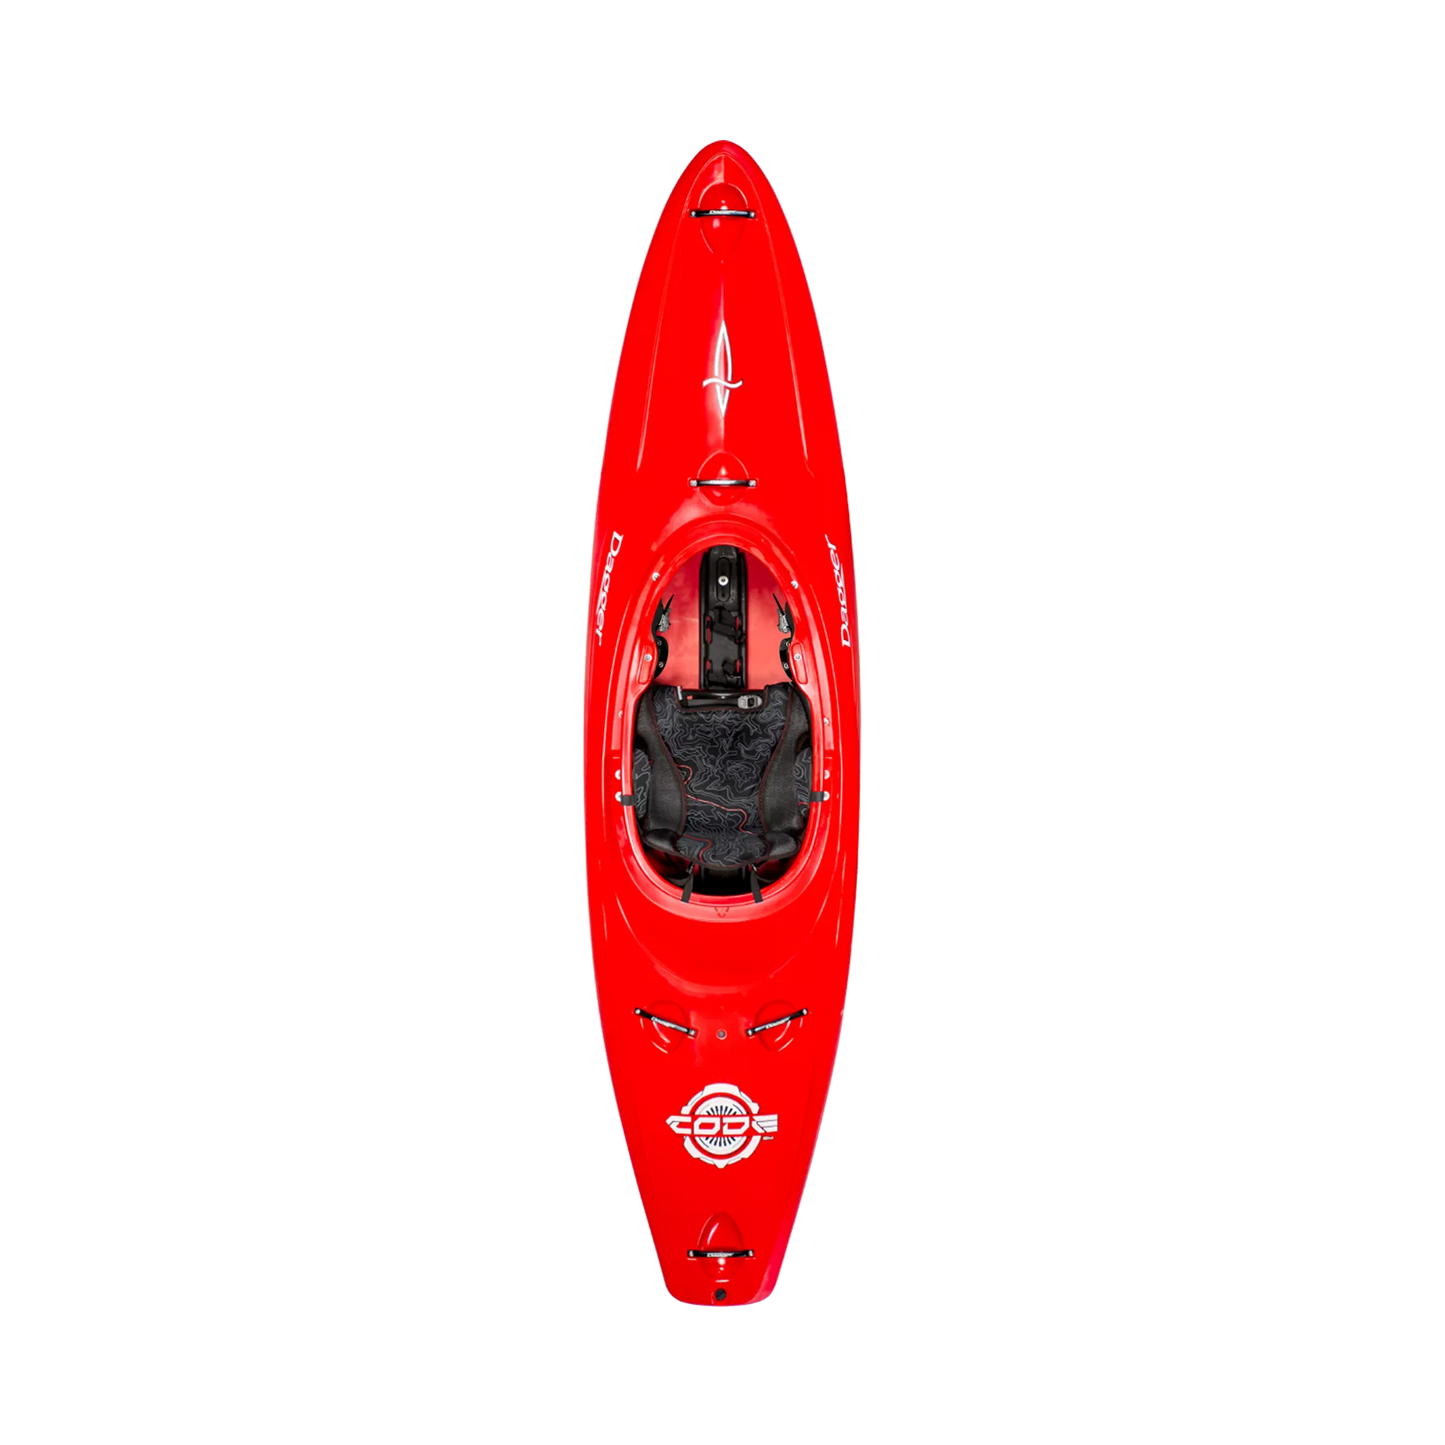 The Red Dagger Code creek whitewater kayak with new thigh brace system.